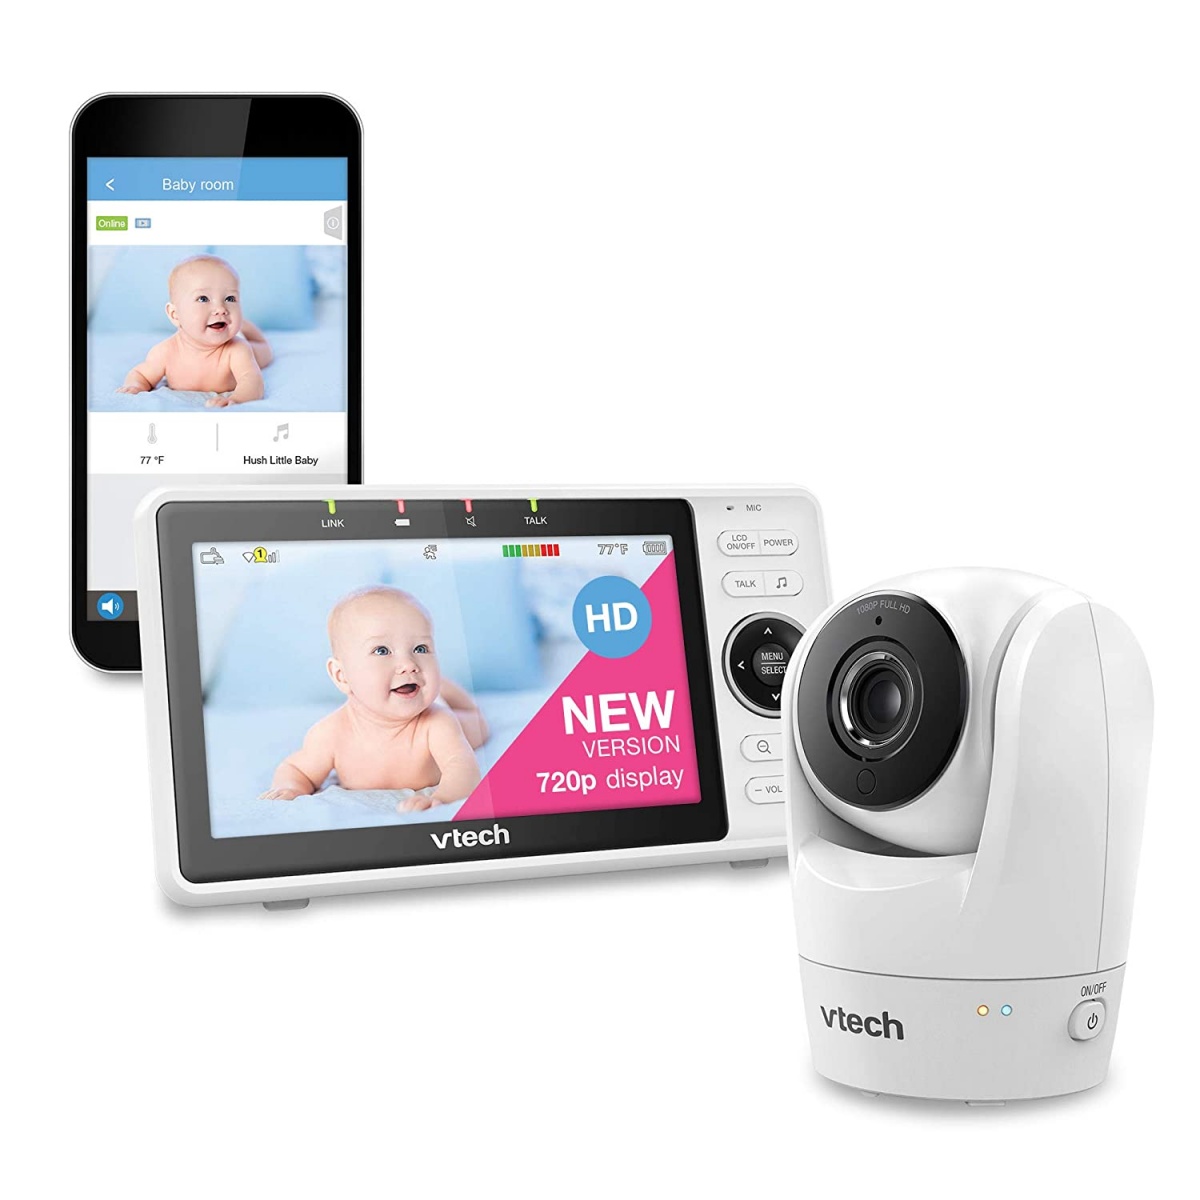 vtech upgraded smart vm901 5" display video monitor review